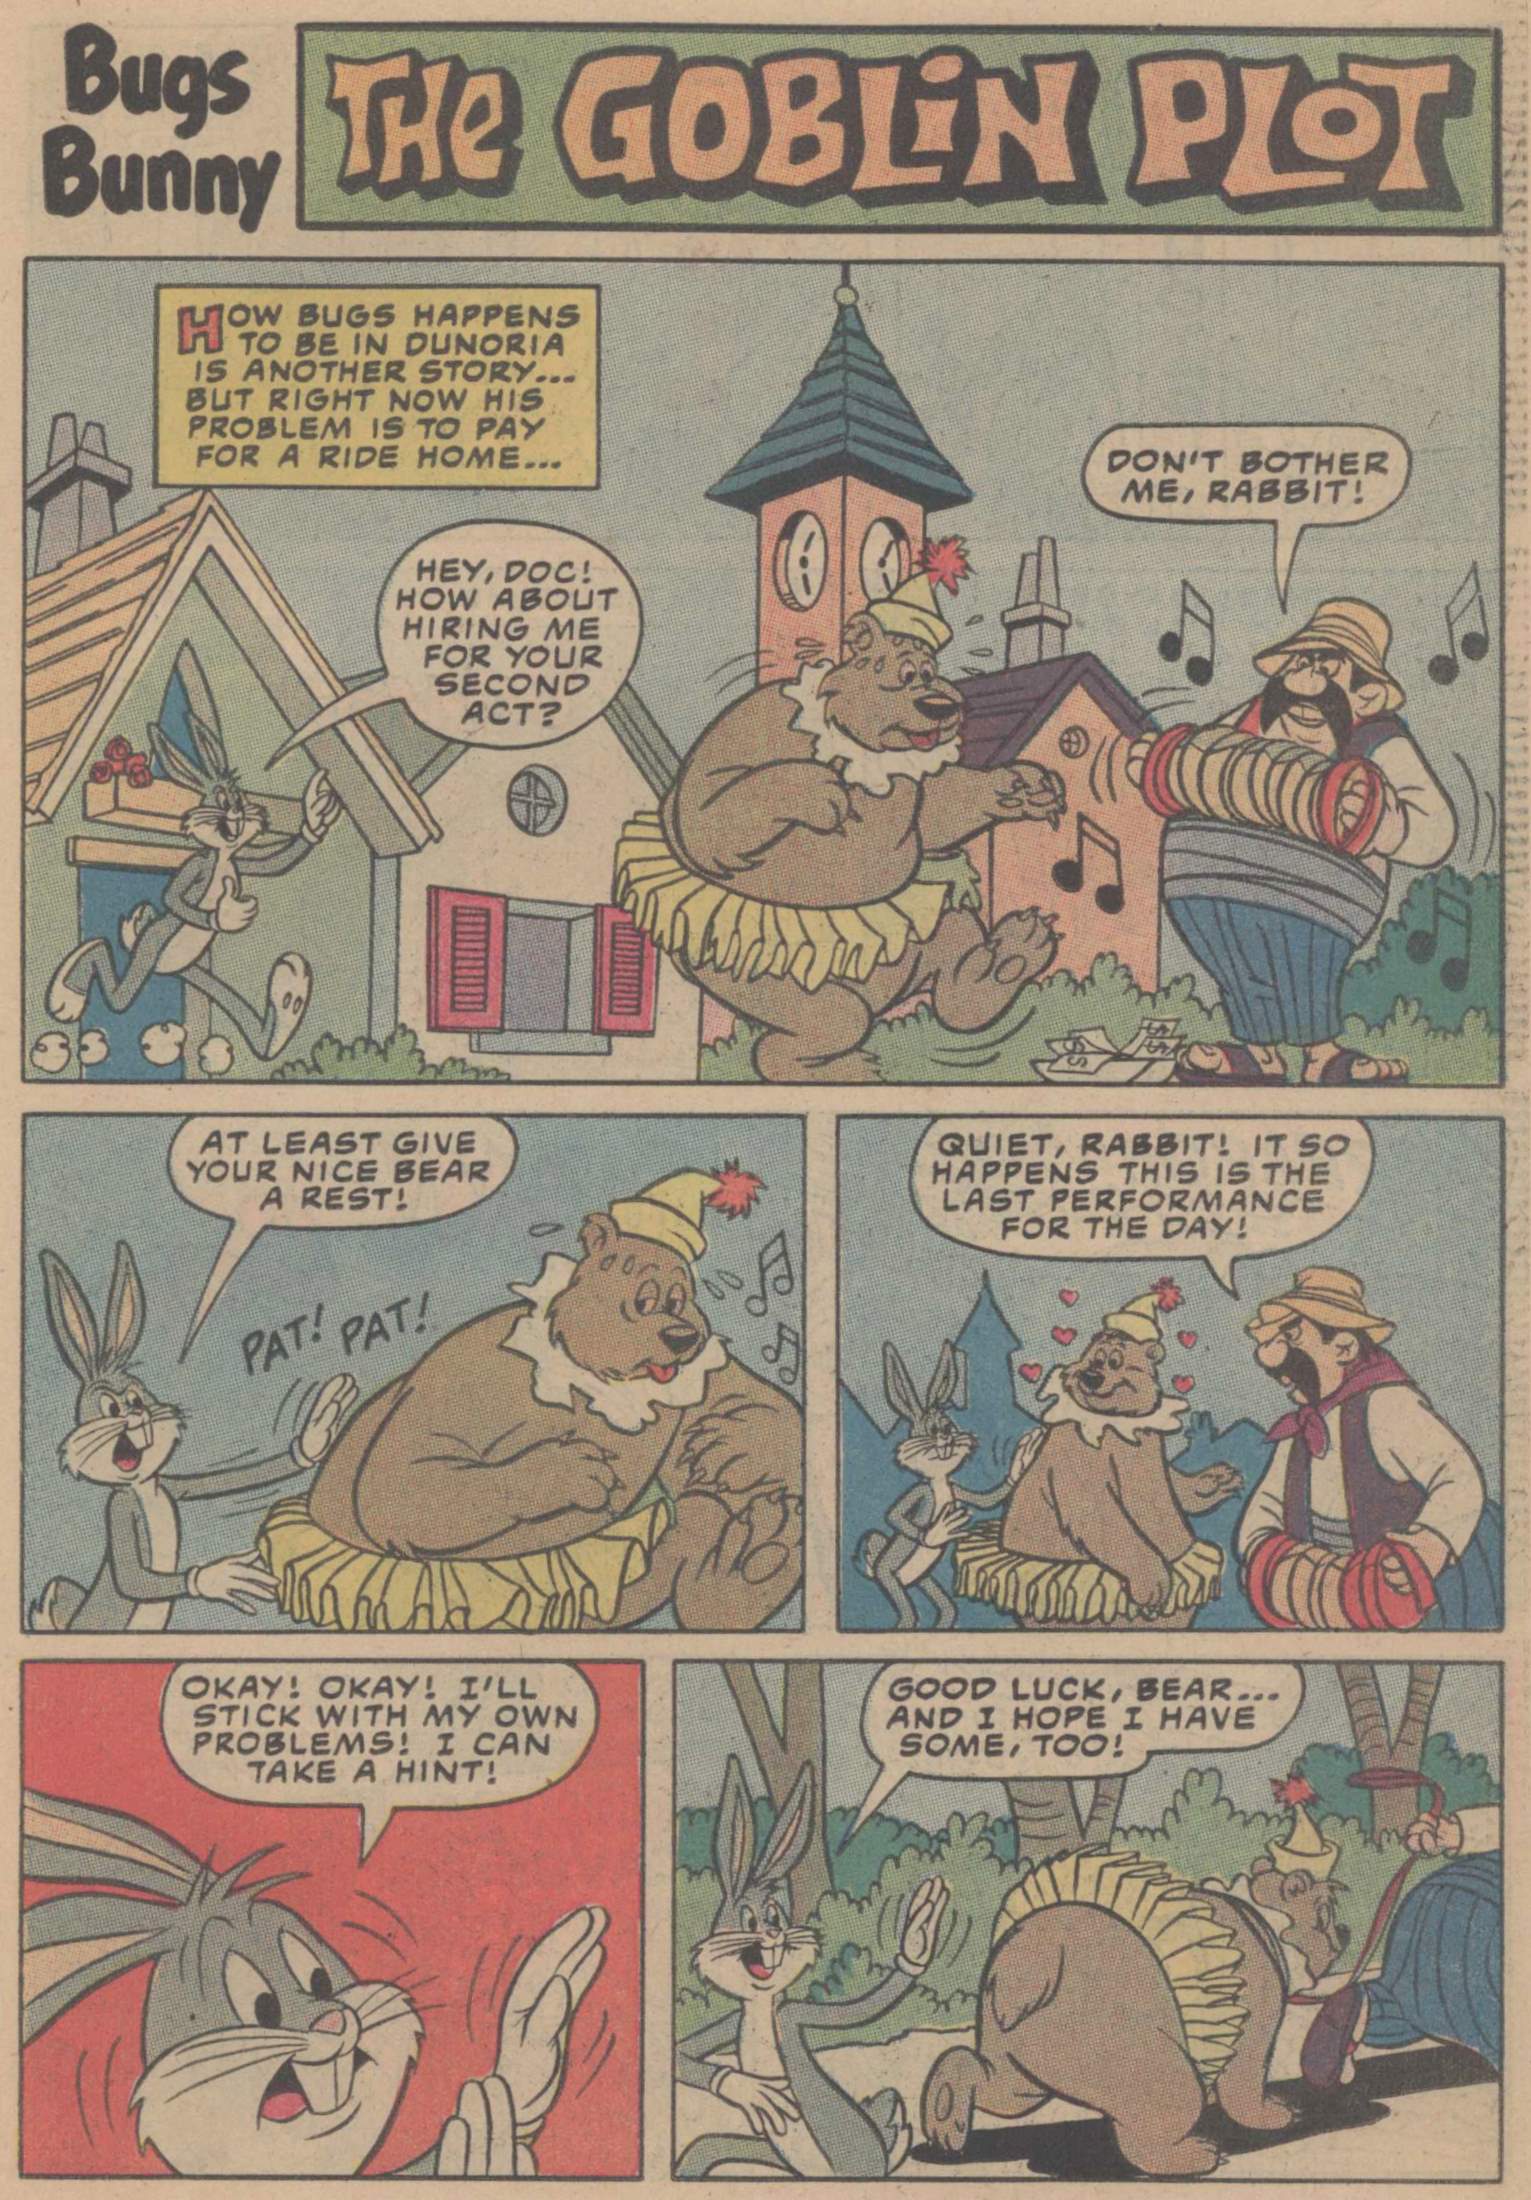 Read online Bugs Bunny comic -  Issue #234 - 23